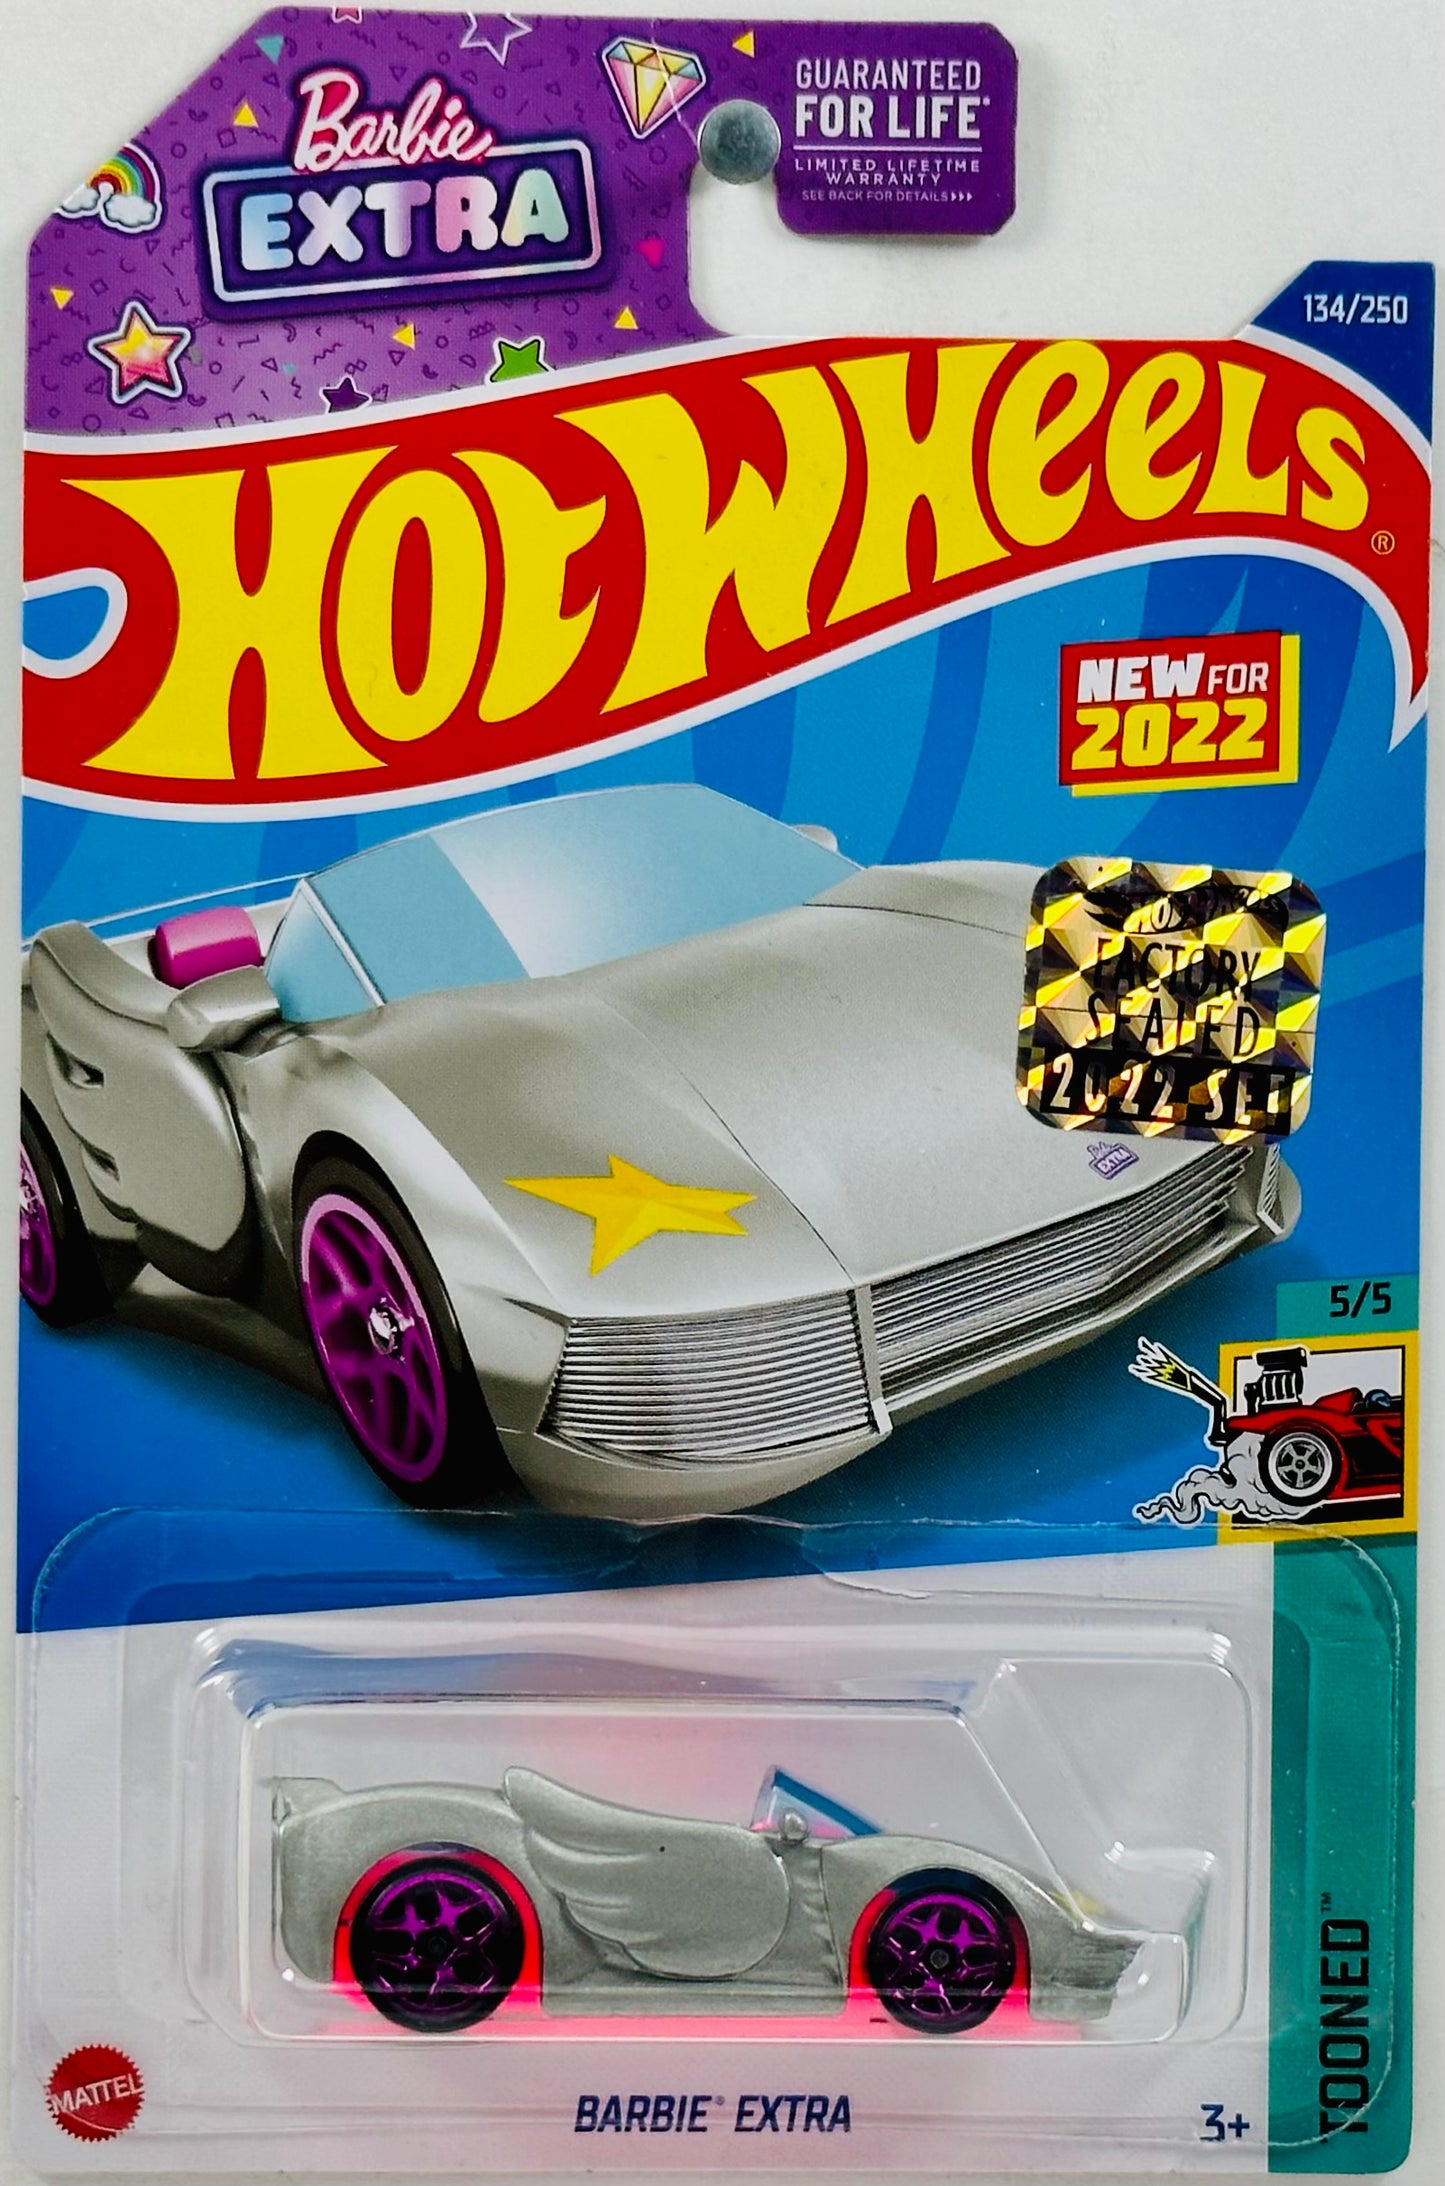 Hot Wheels 2022 - Collector # 134/250 - Tooned 05/05 - New Models - Barbie Extra - Silver - FSC